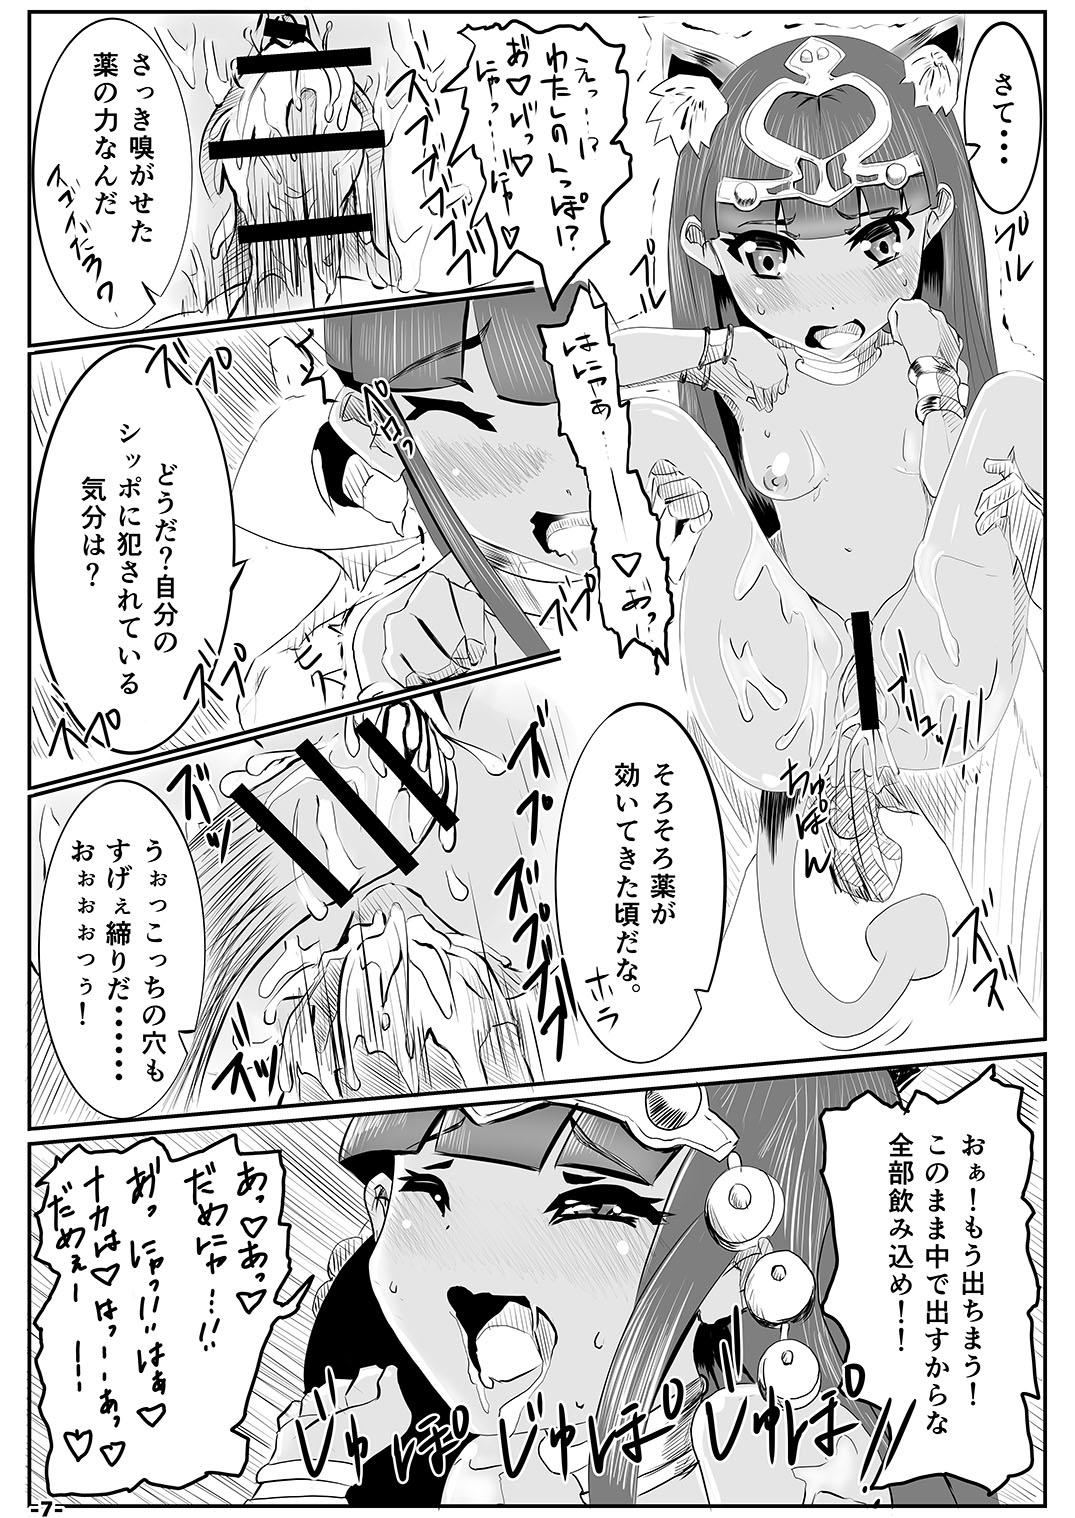 Piercing Yamiochi 2nd - Puzzle and dragons Pussy Licking - Page 6